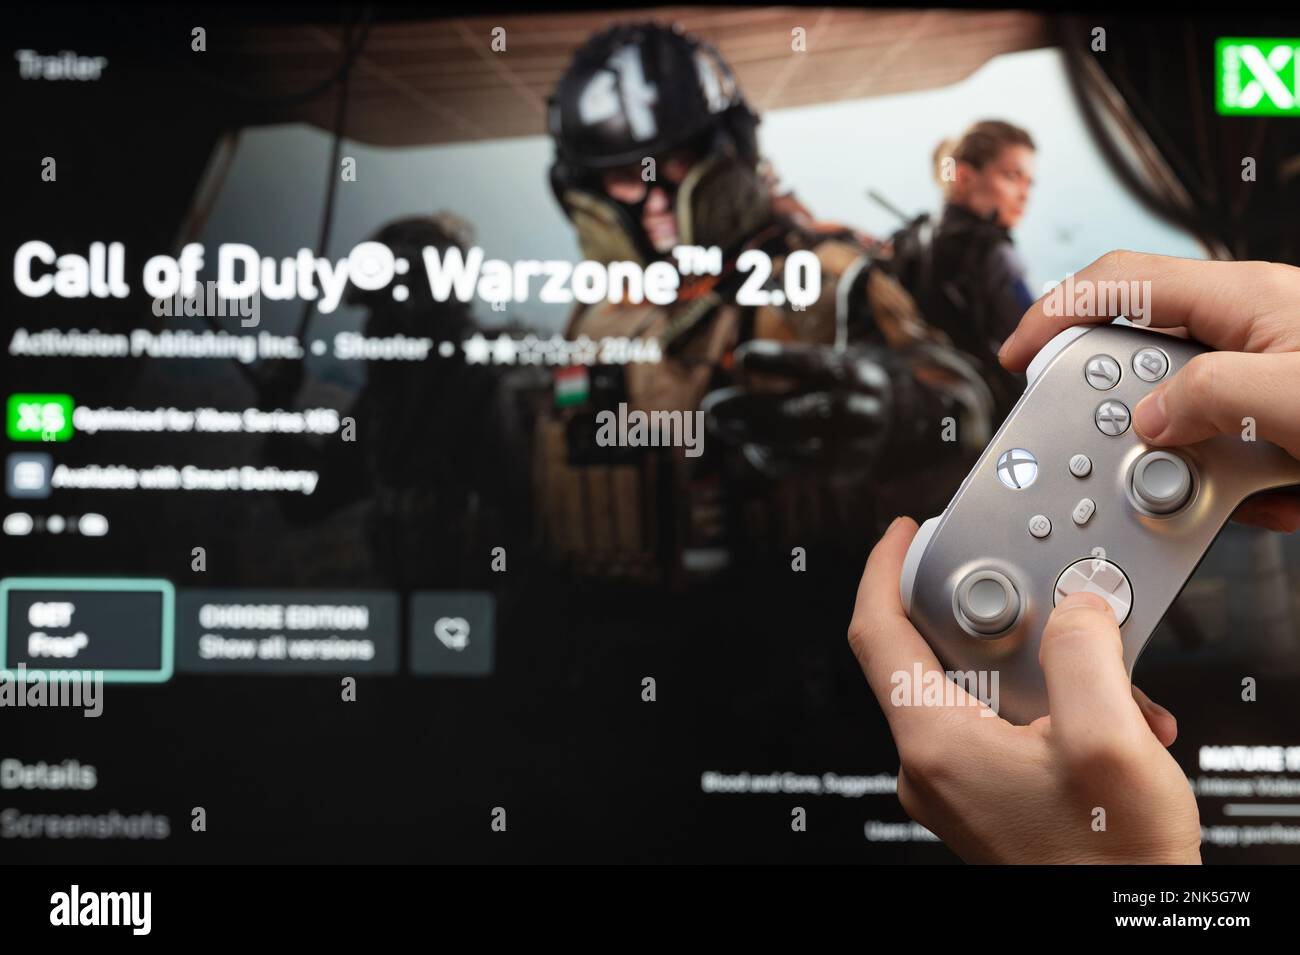 New york, USA - February 20, 2023: Play Call of Duty Warzone console game on TV Xbox with joystick in hand close up view Stock Photo